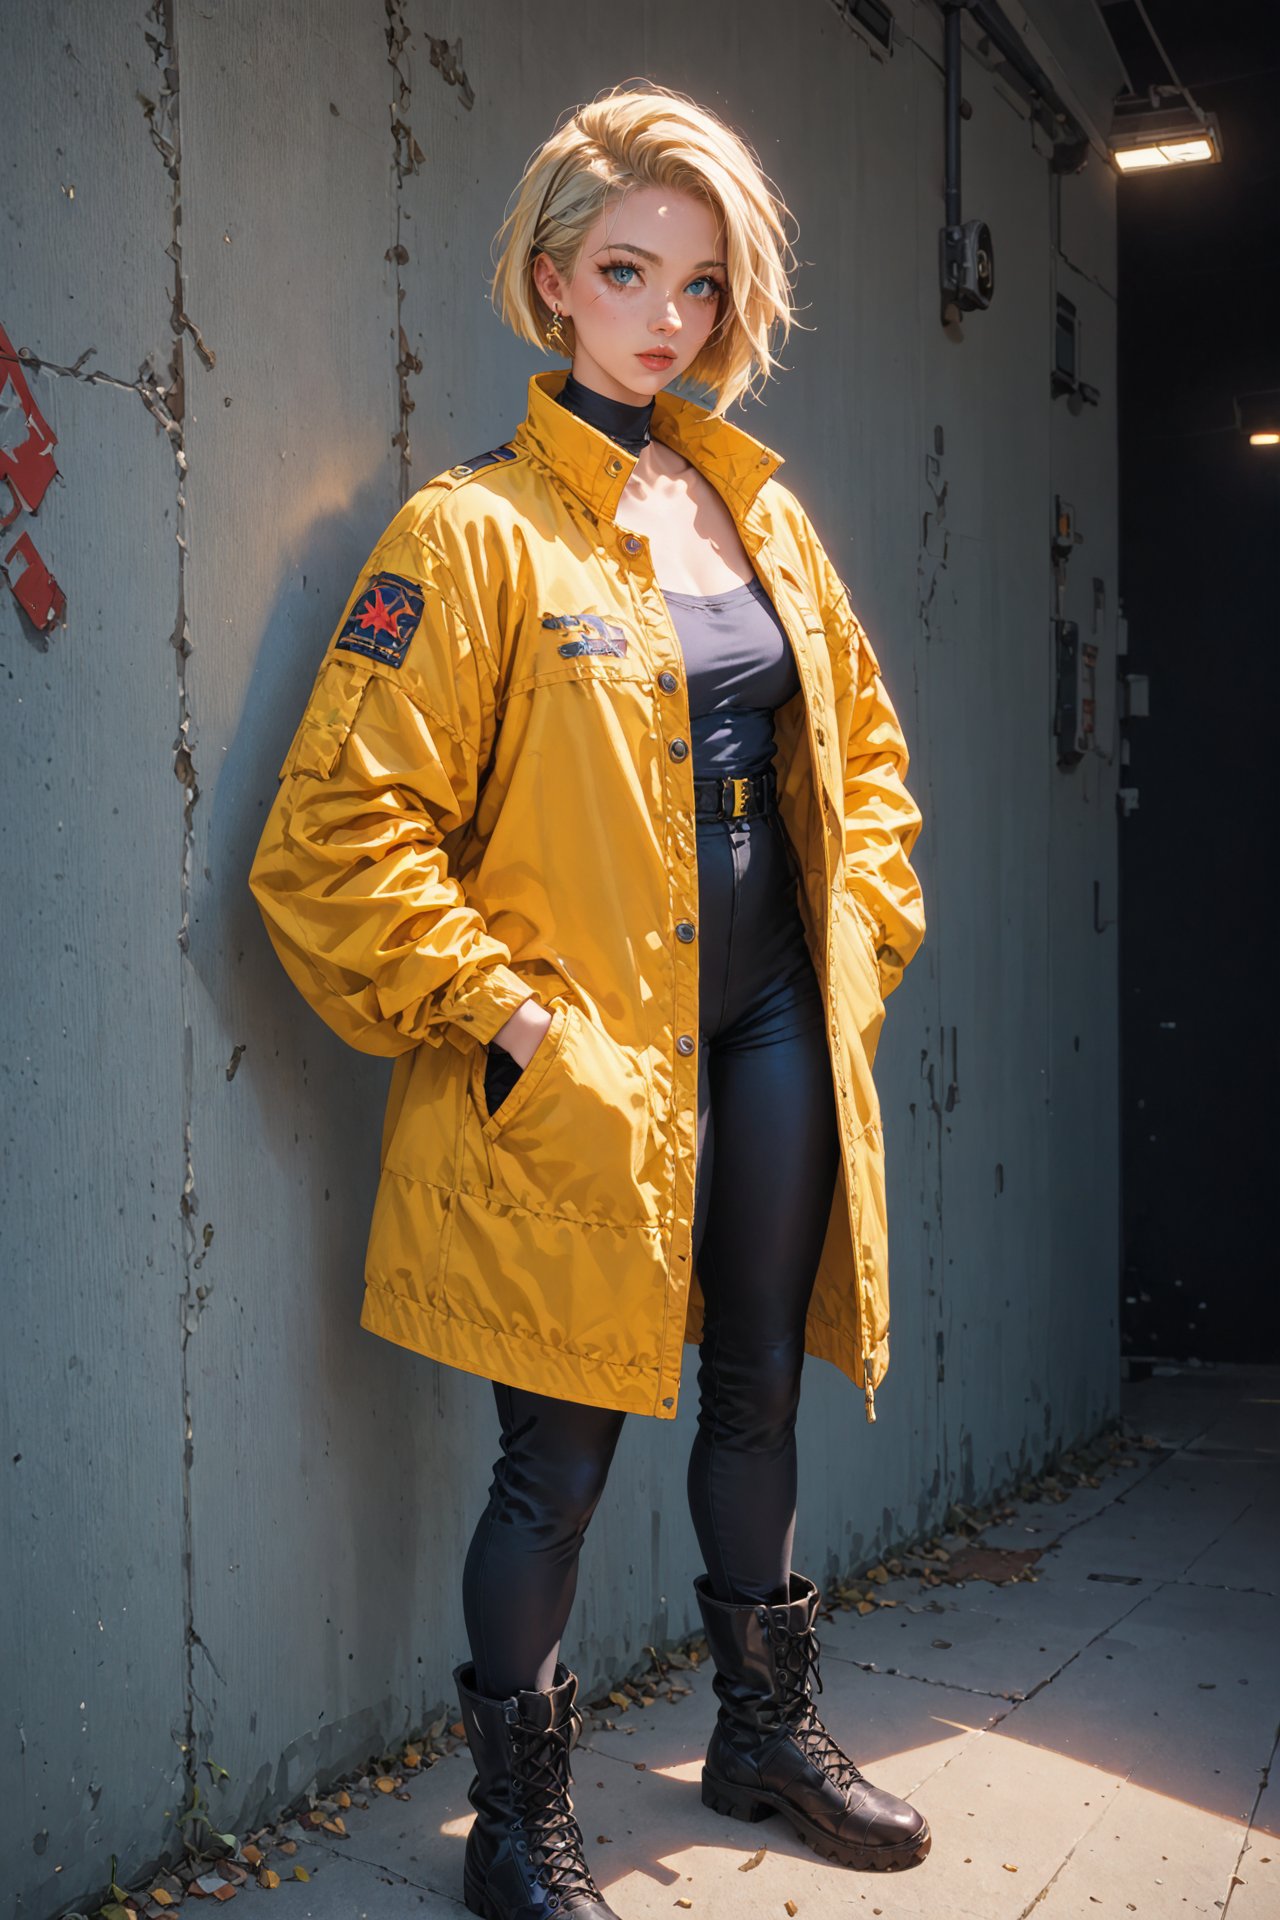 score_9, score_8_up, score_7_up, score_6_up, masterpiece, best quality, absurdres, digital art,   akaneh, short hair, blue eyes, blonde hair,
a woman in a yellow jacket and black pants standing in front of a yellow light with her hands on her hips and her leg crossed, wearing a pair of black boots and a pair of metal earrings, cyberpunk style, cyberpunk art, retrofuturism